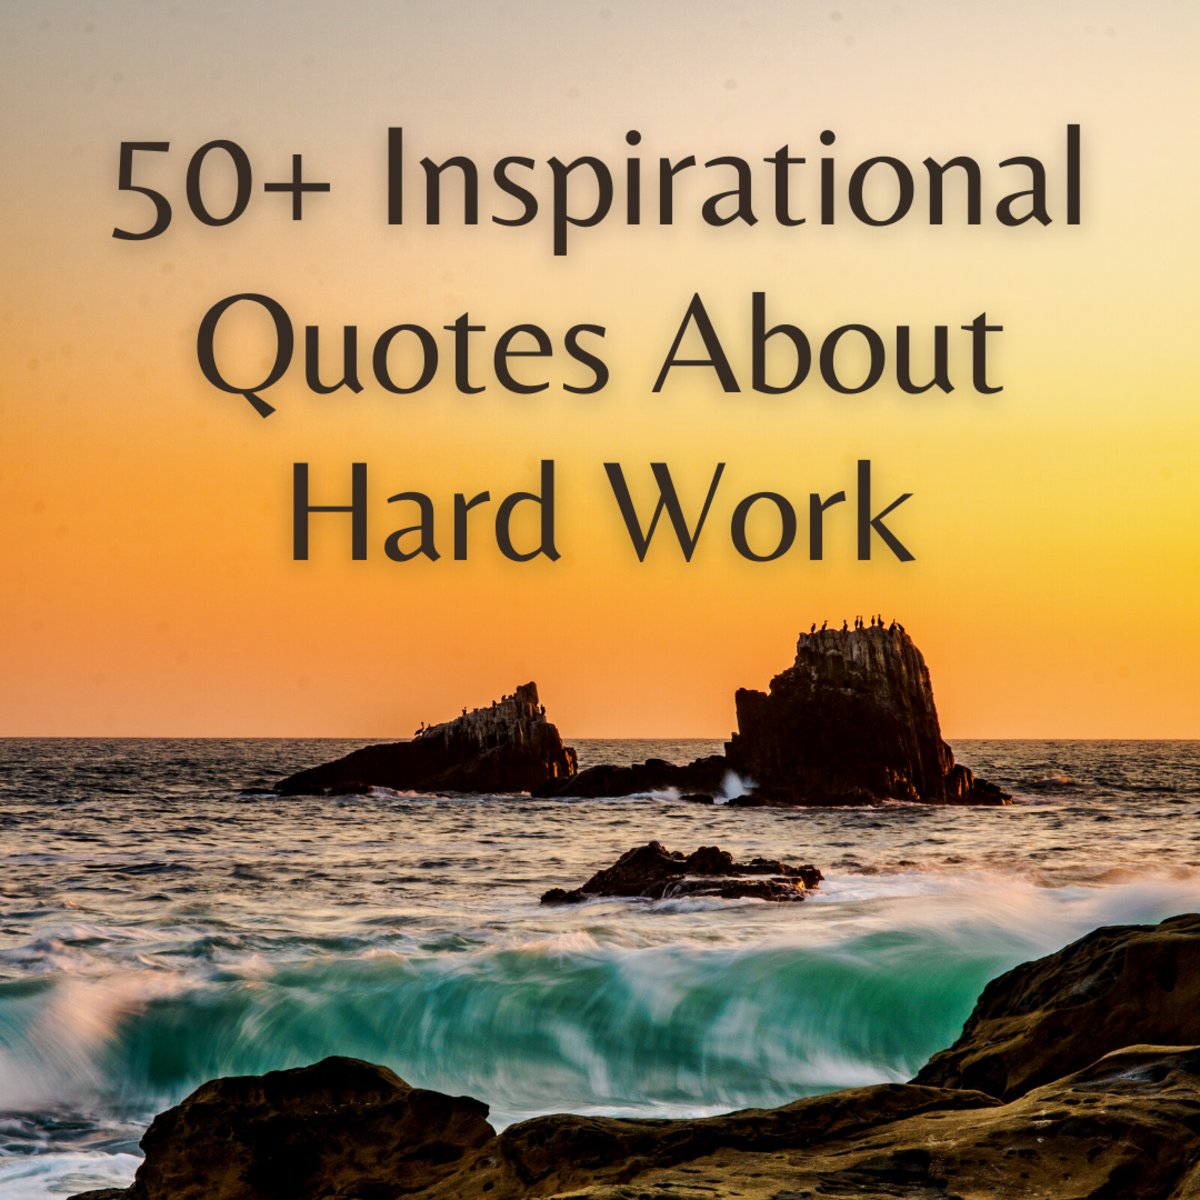 Read on for 50+ inspirational and motivational quotes about the power of hard work!